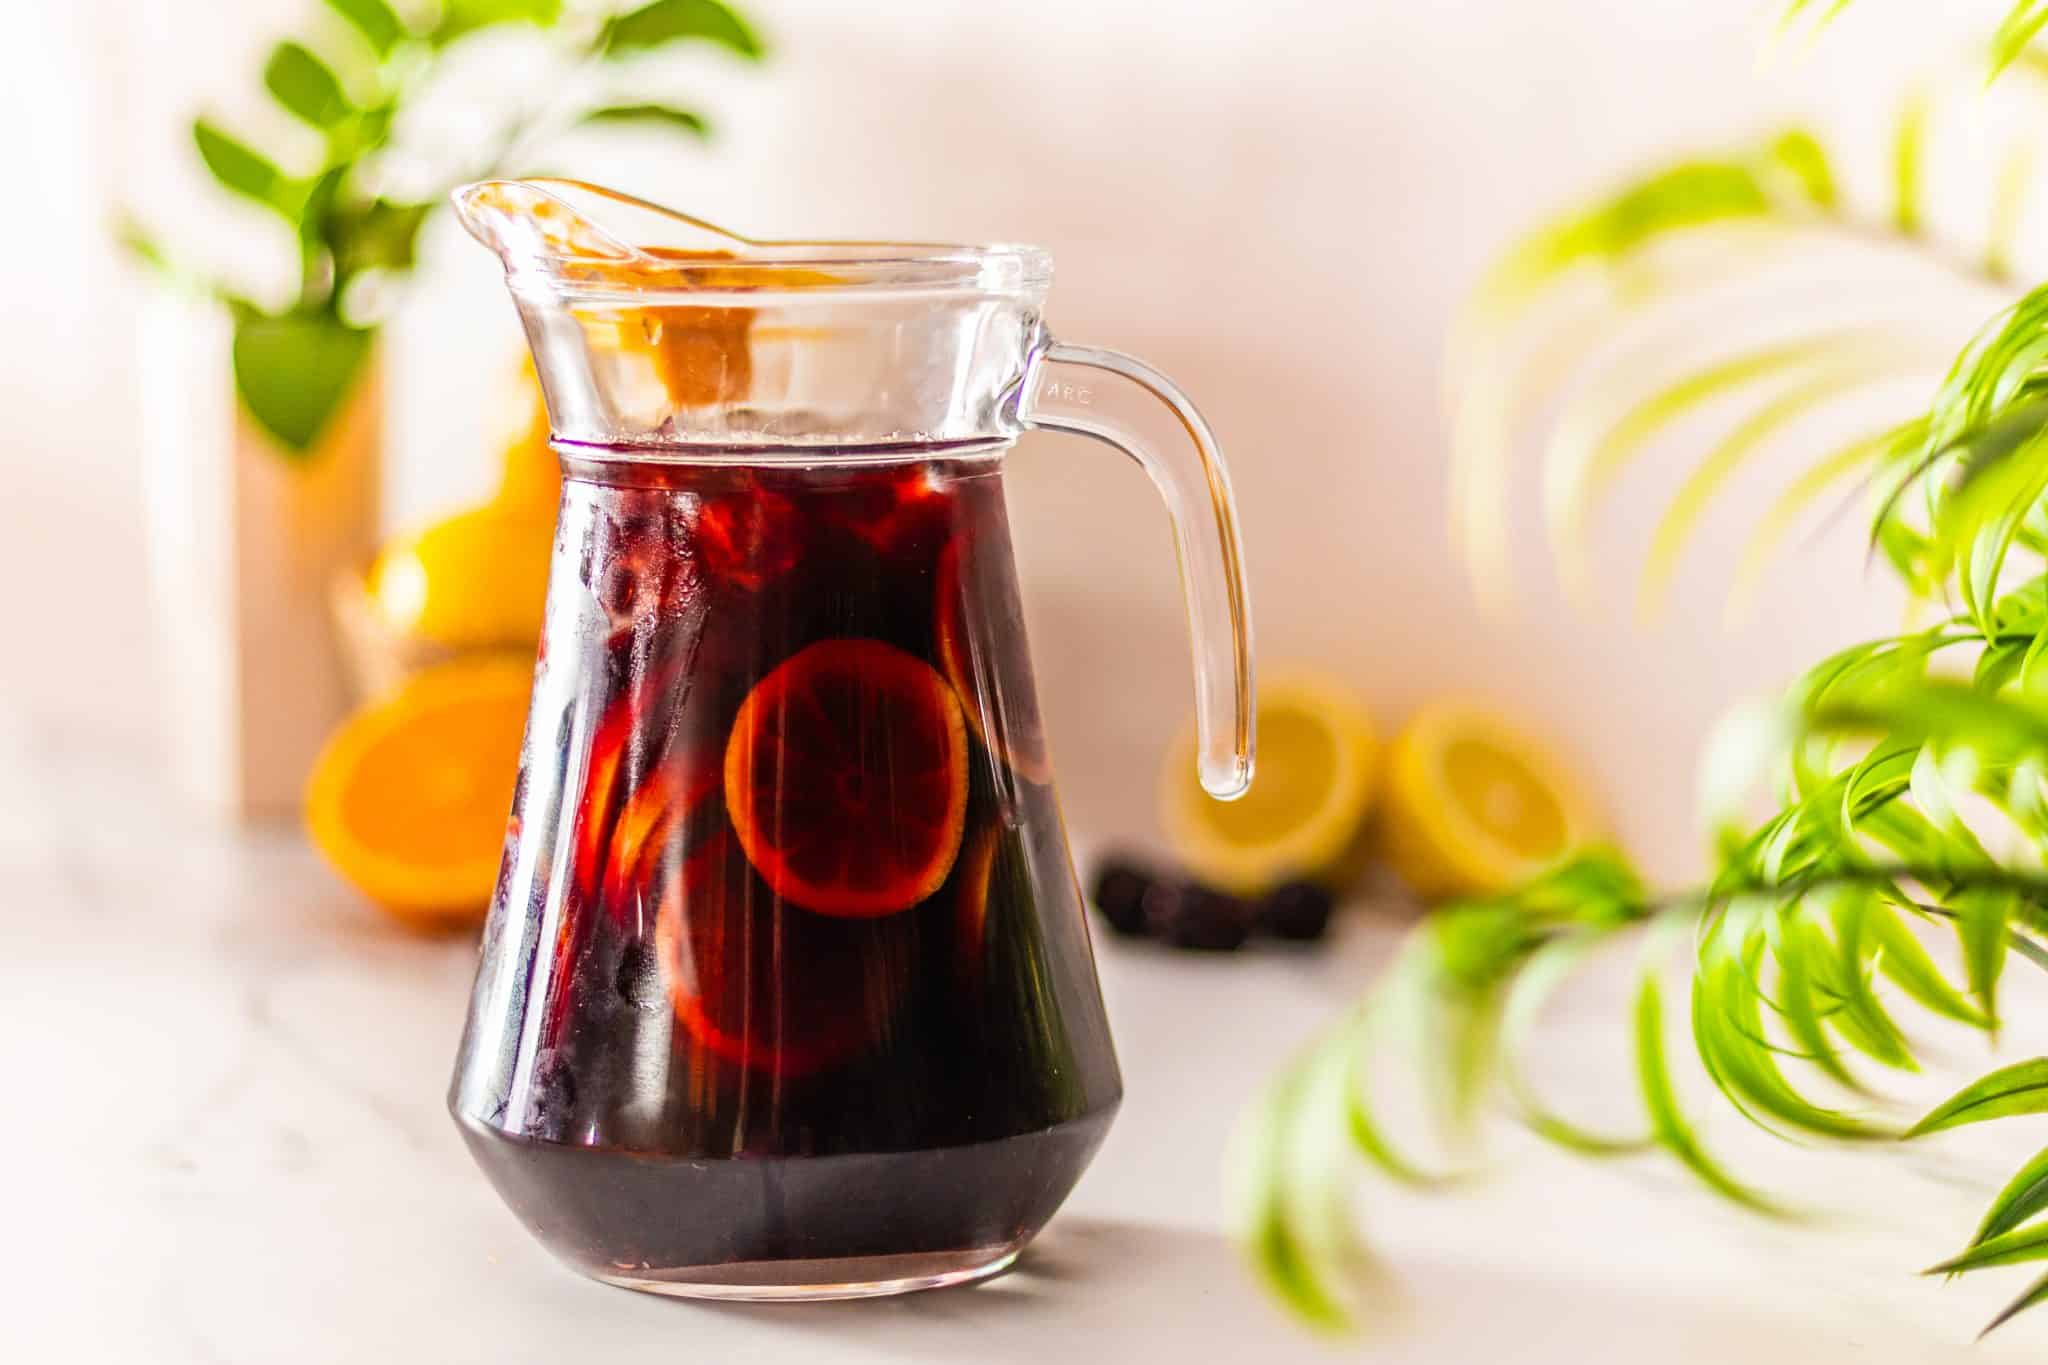 A Sangria Drink in a pitcher on a white table with some oranges behind and some plant leaves on the side.